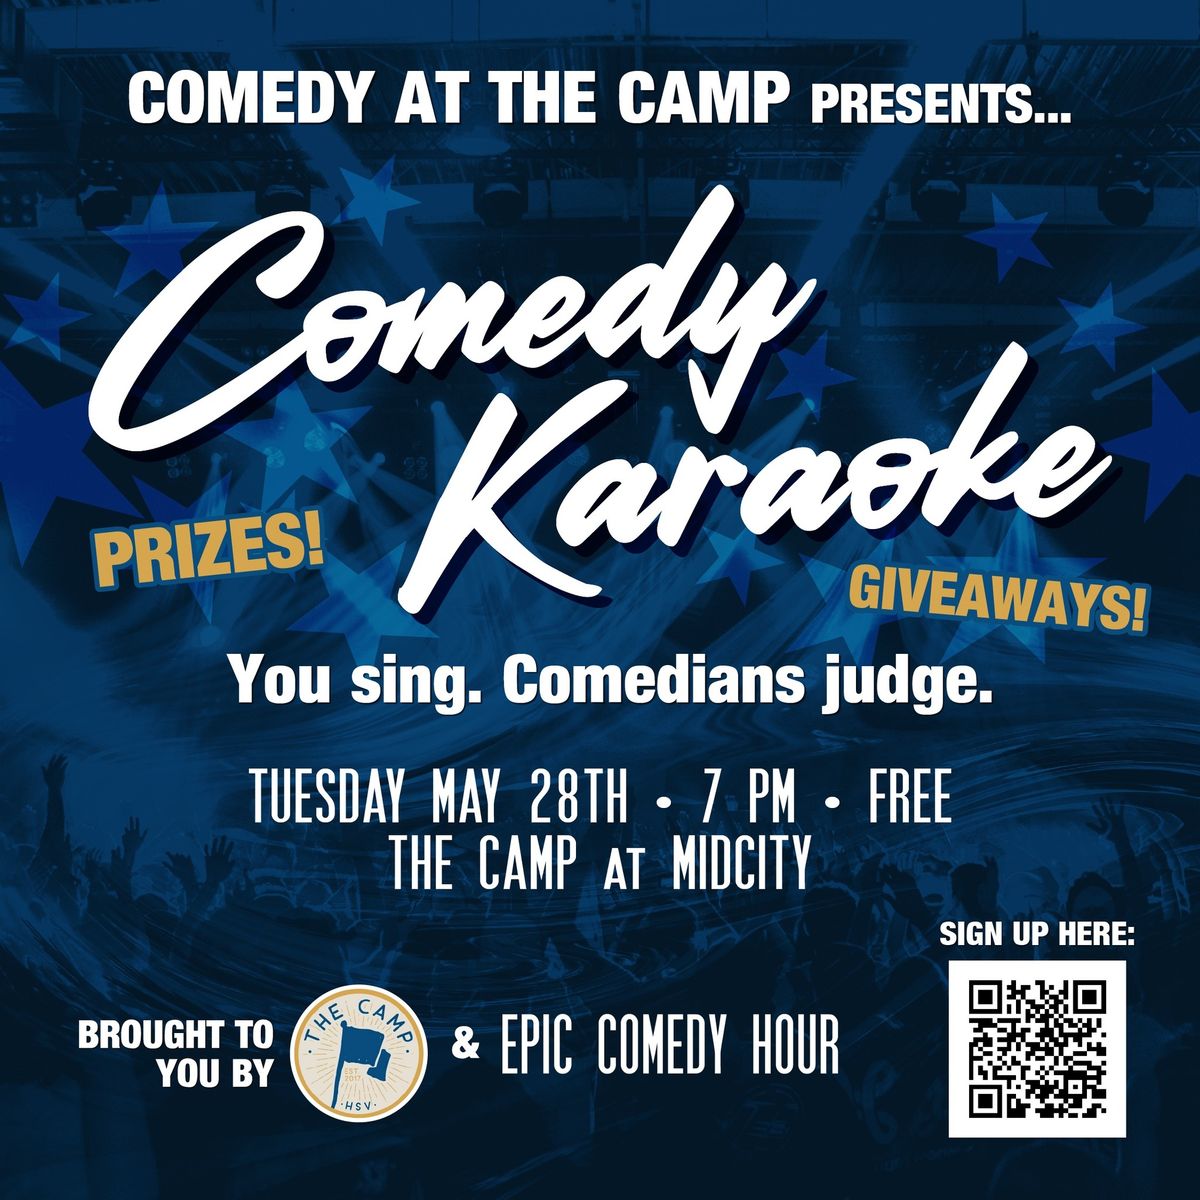 Comedy at the Camp presents: Comedy Karaoke